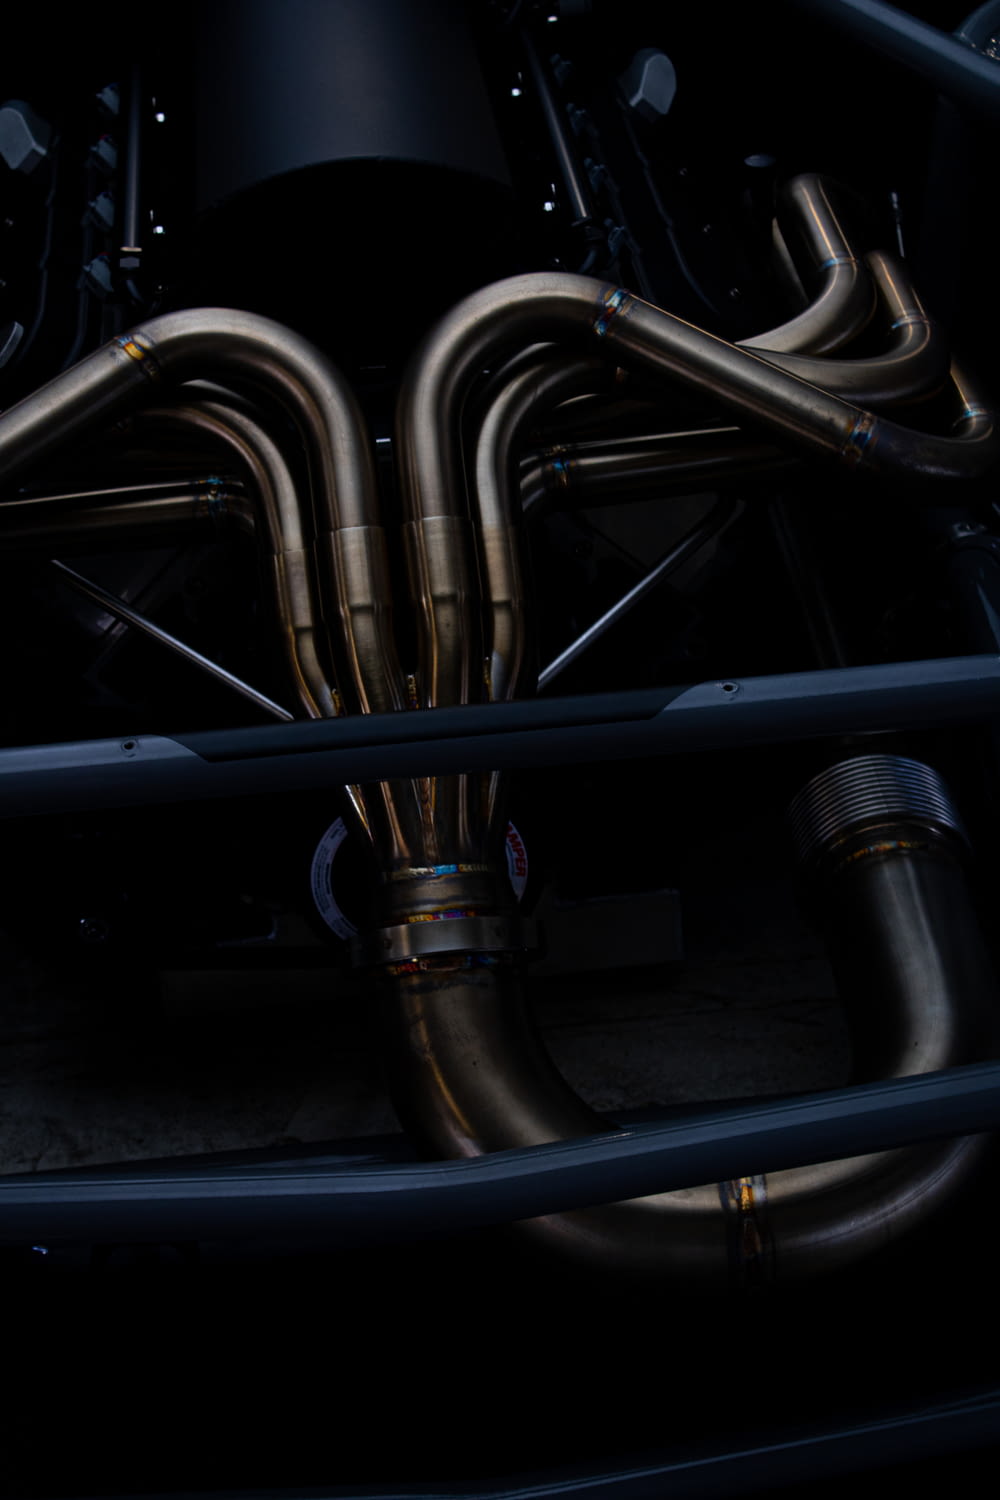 a close up of a car's exhaust system